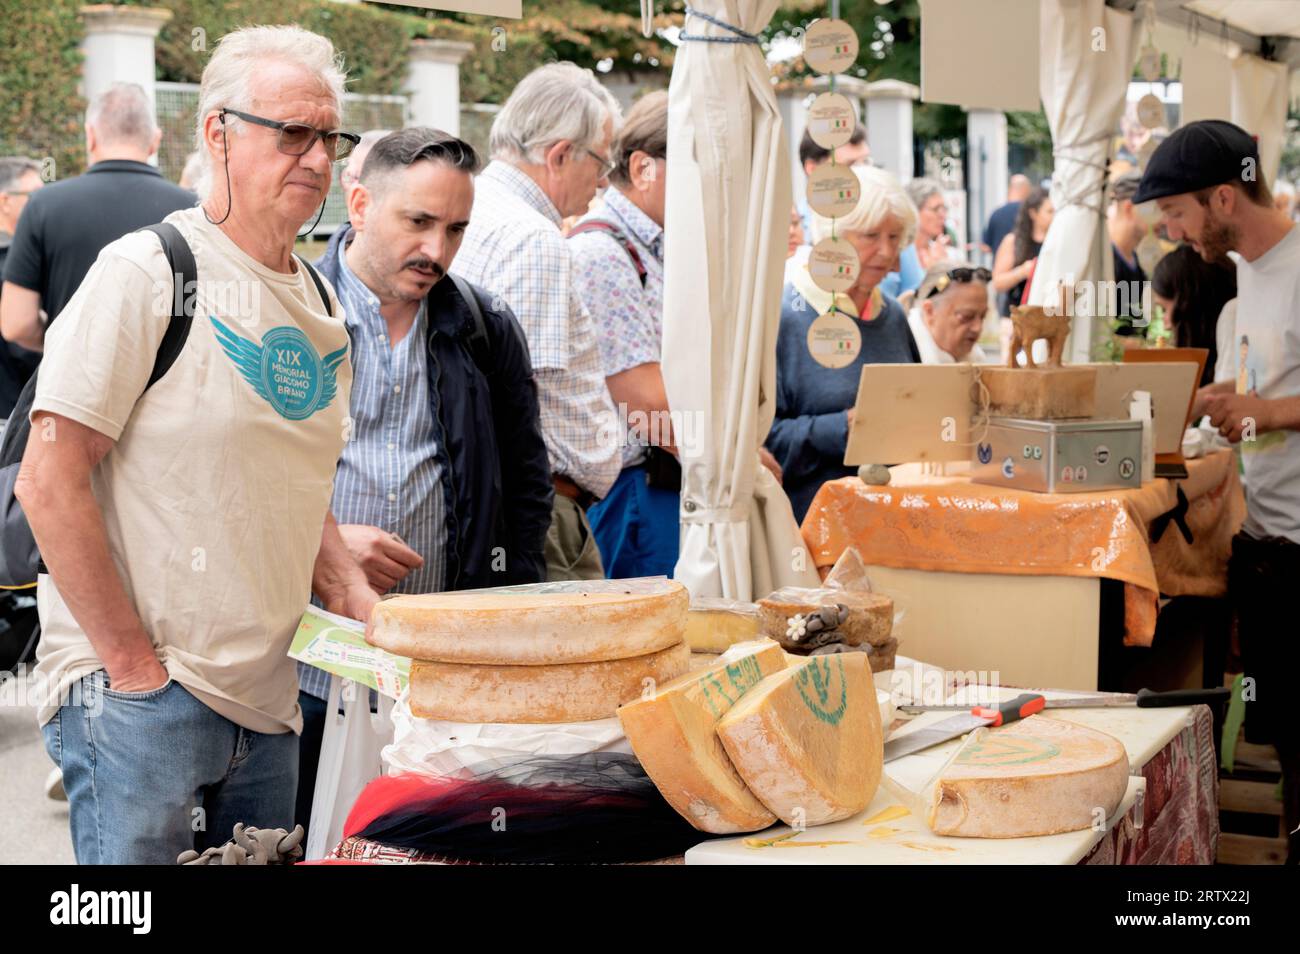 Bra (Cuneo), Italy. 15th September 2023. Inauguration of the XIV edition of the international Cheese fair, organized by the Slow Food movement and the municipal administration of Bra. In this image you can see some visitors to the fair intent on tasting the cheeses on display. Credit: Luca Prestia / Alamy Live News Stock Photo